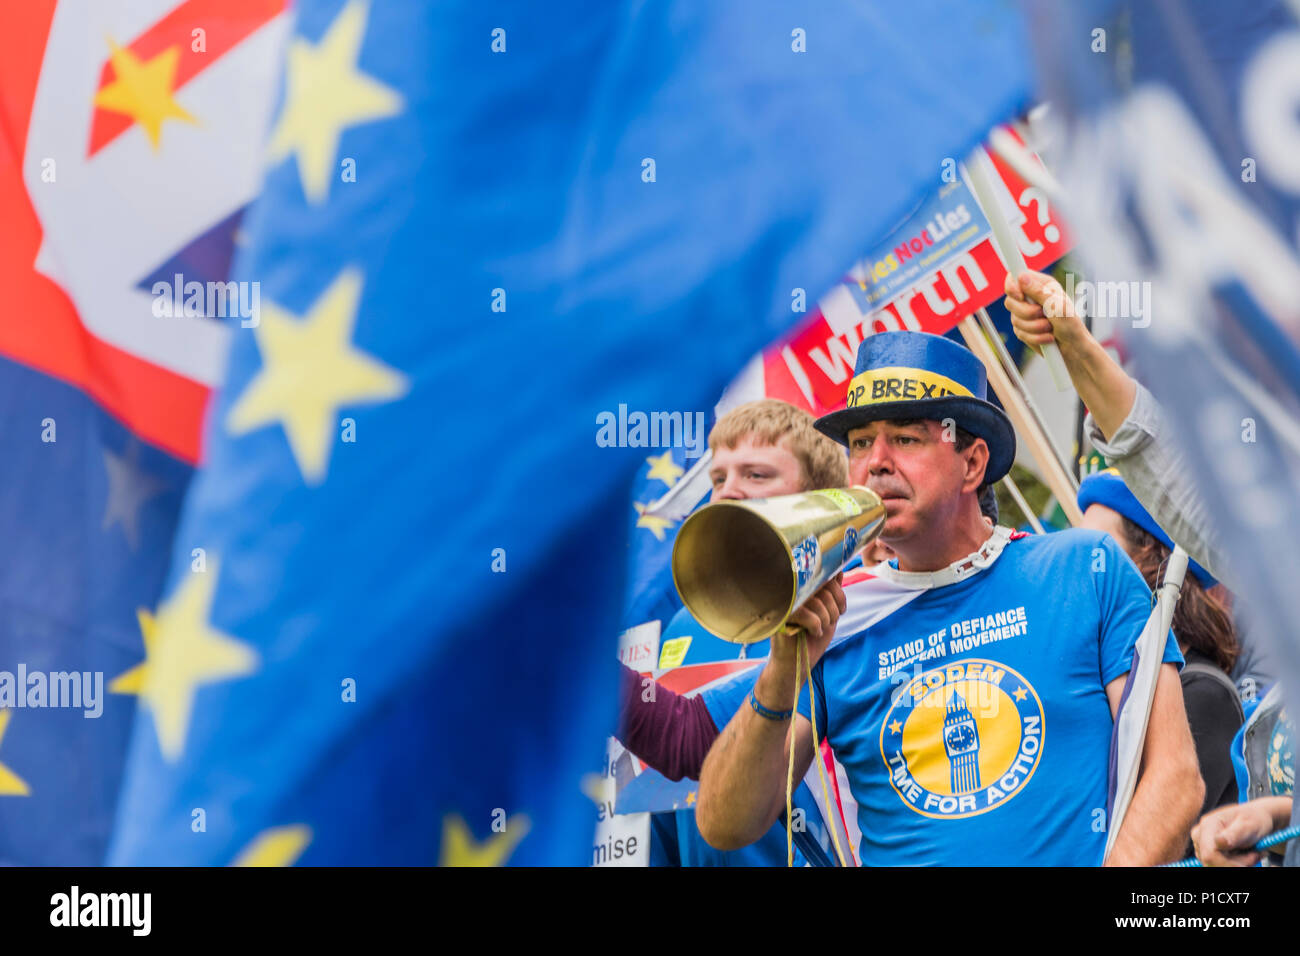 London, UK. 12th june 2018. Stand of Defiance European Movement (SODEM) spokesperson and founder, Steven Bray, uses a megaphone to make himself heard, protesting behind the TV camera positions - As the commons debate on the Brexit deal approaches, members of SODEM and other anti-Brexit, pro-EU groups gather outside Parliament for a Pies not Lies protest. Credit: Guy Bell/Alamy Live News Stock Photo